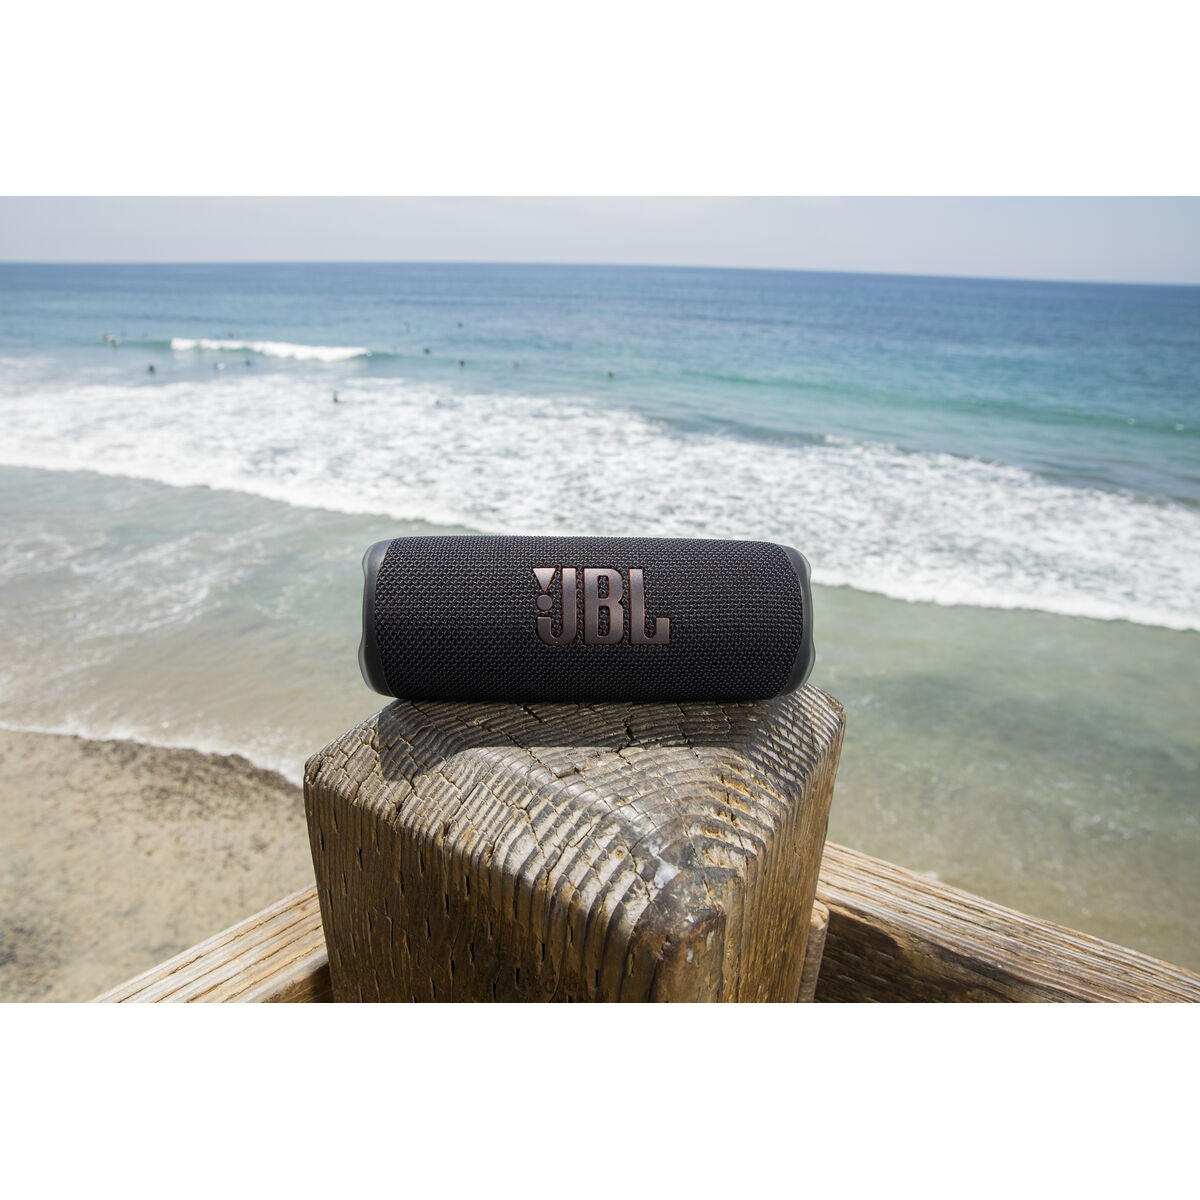 Portable Bluetooth Speakers JBL Flip 6 20 W Grey, JBL, Electronics, Mobile communication and accessories, portable-bluetooth-speakers-jbl-flip-6-20-w-grey, Brand_JBL, category-reference-2609, category-reference-2882, category-reference-2923, category-reference-t-19653, category-reference-t-21311, category-reference-t-25527, category-reference-t-4036, category-reference-t-4037, Condition_NEW, entertainment, music, Price_100 - 200, telephones & tablets, wifi y bluetooth, RiotNook